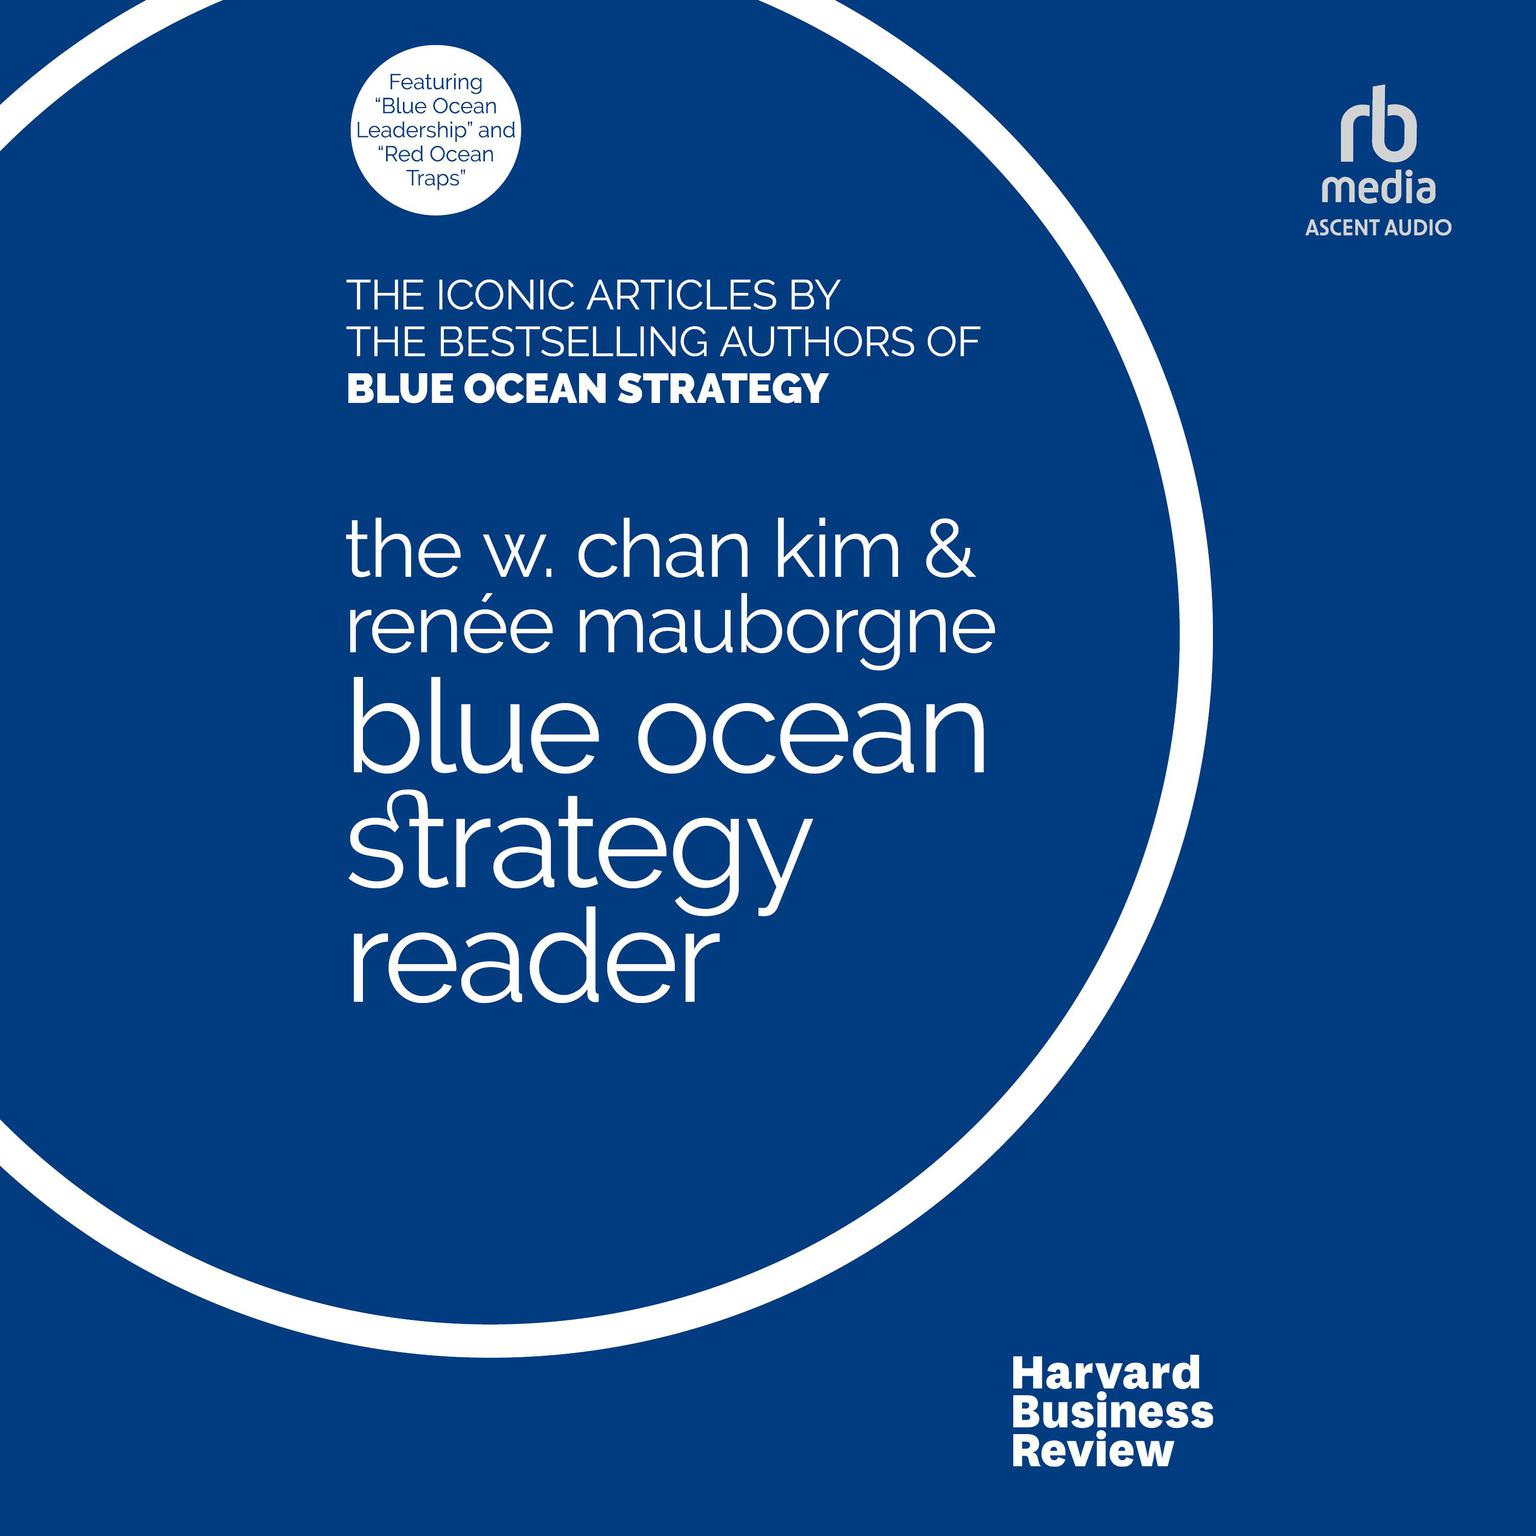 The W. Chan Kim and Renée Mauborgne Blue Ocean Strategy Reader: The iconic articles by bestselling authors W. Chan Kim and Renée Mauborgne Audiobook, by W. Chan Kim